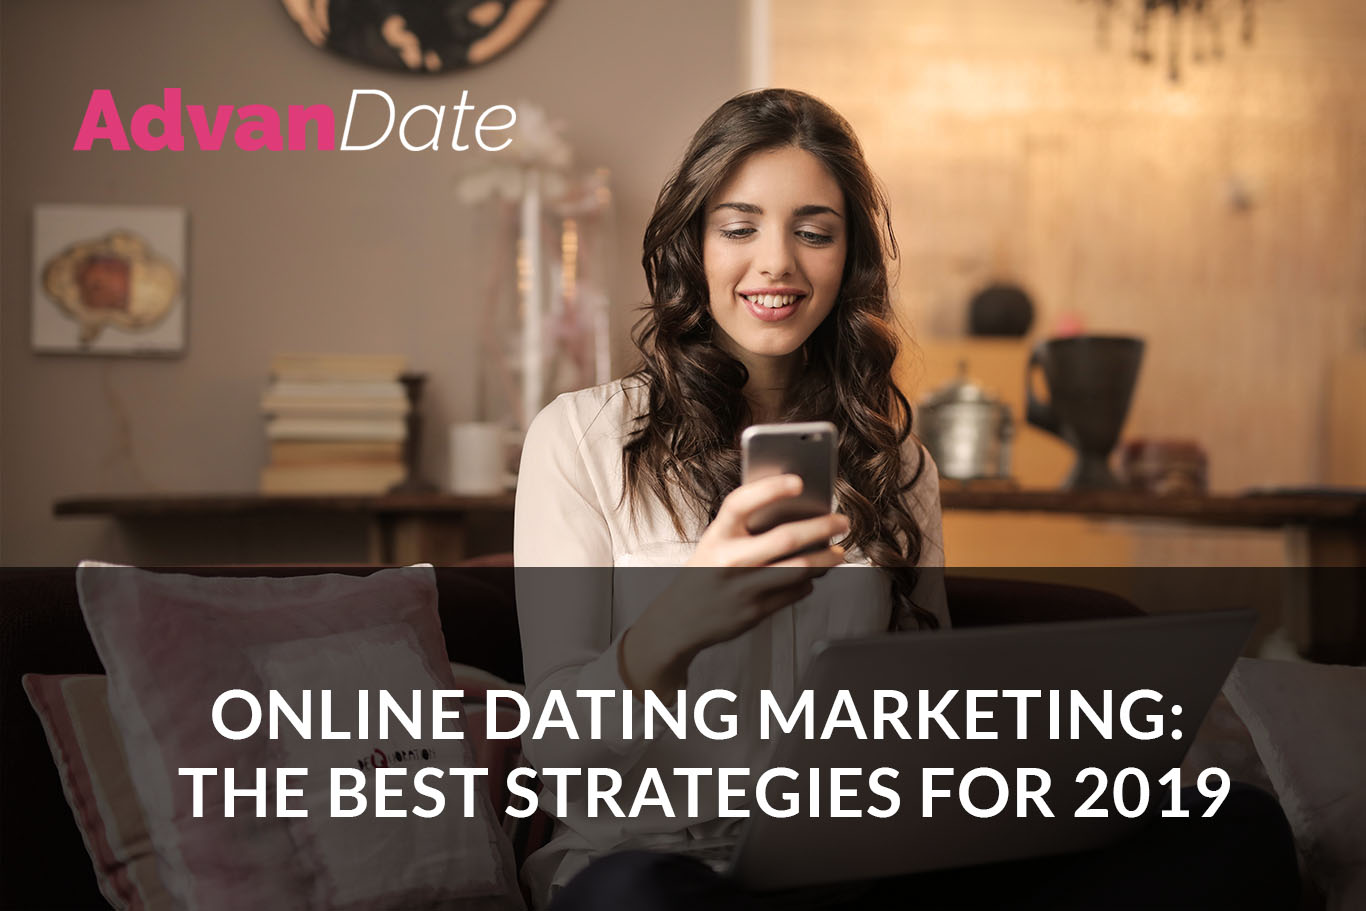 Online dating marketing: the best strategies for 2019